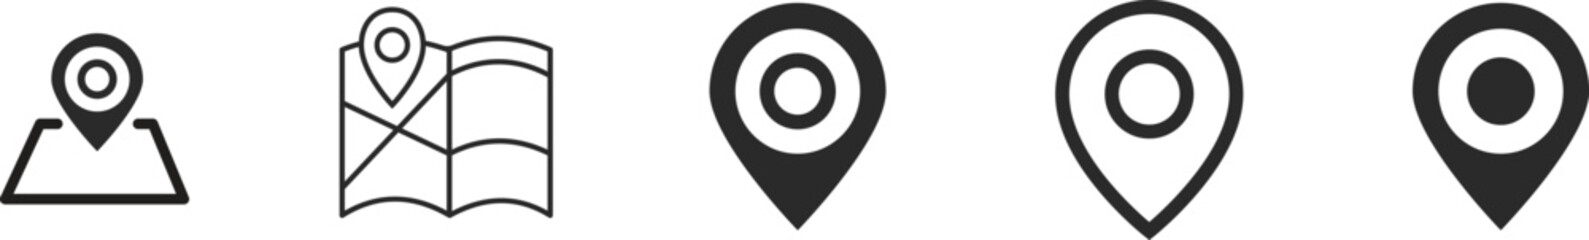 Location pin icons. Map location marker for a place on a map. GPS location symbol. Vector illustration, flat and simple design.